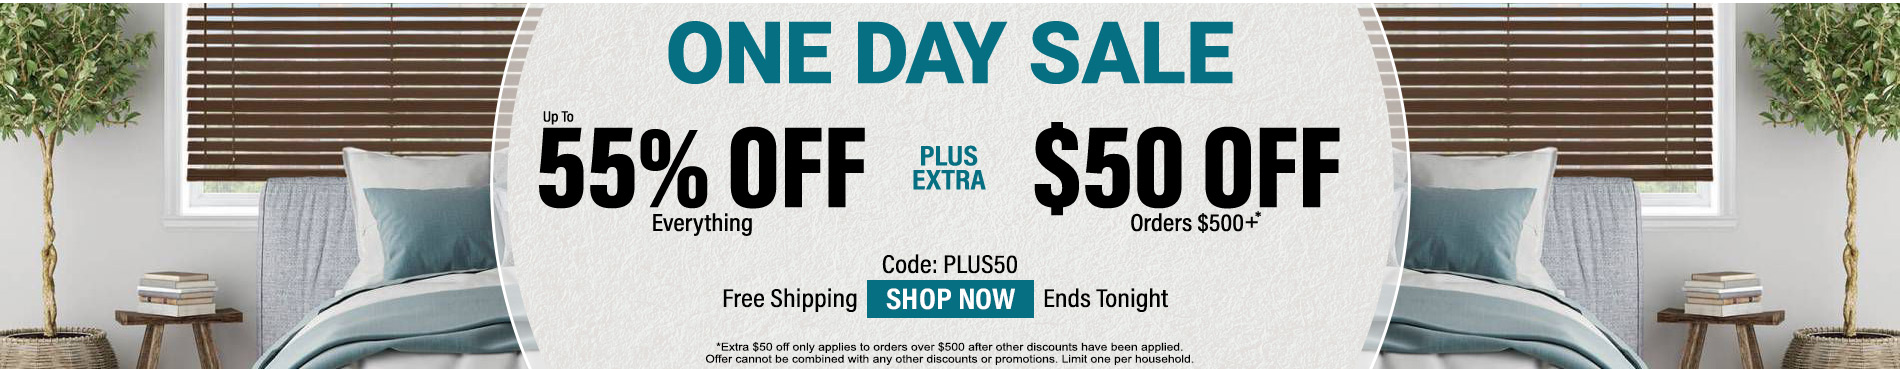 Up to 55% off everything plus extra $50 off orders $500+